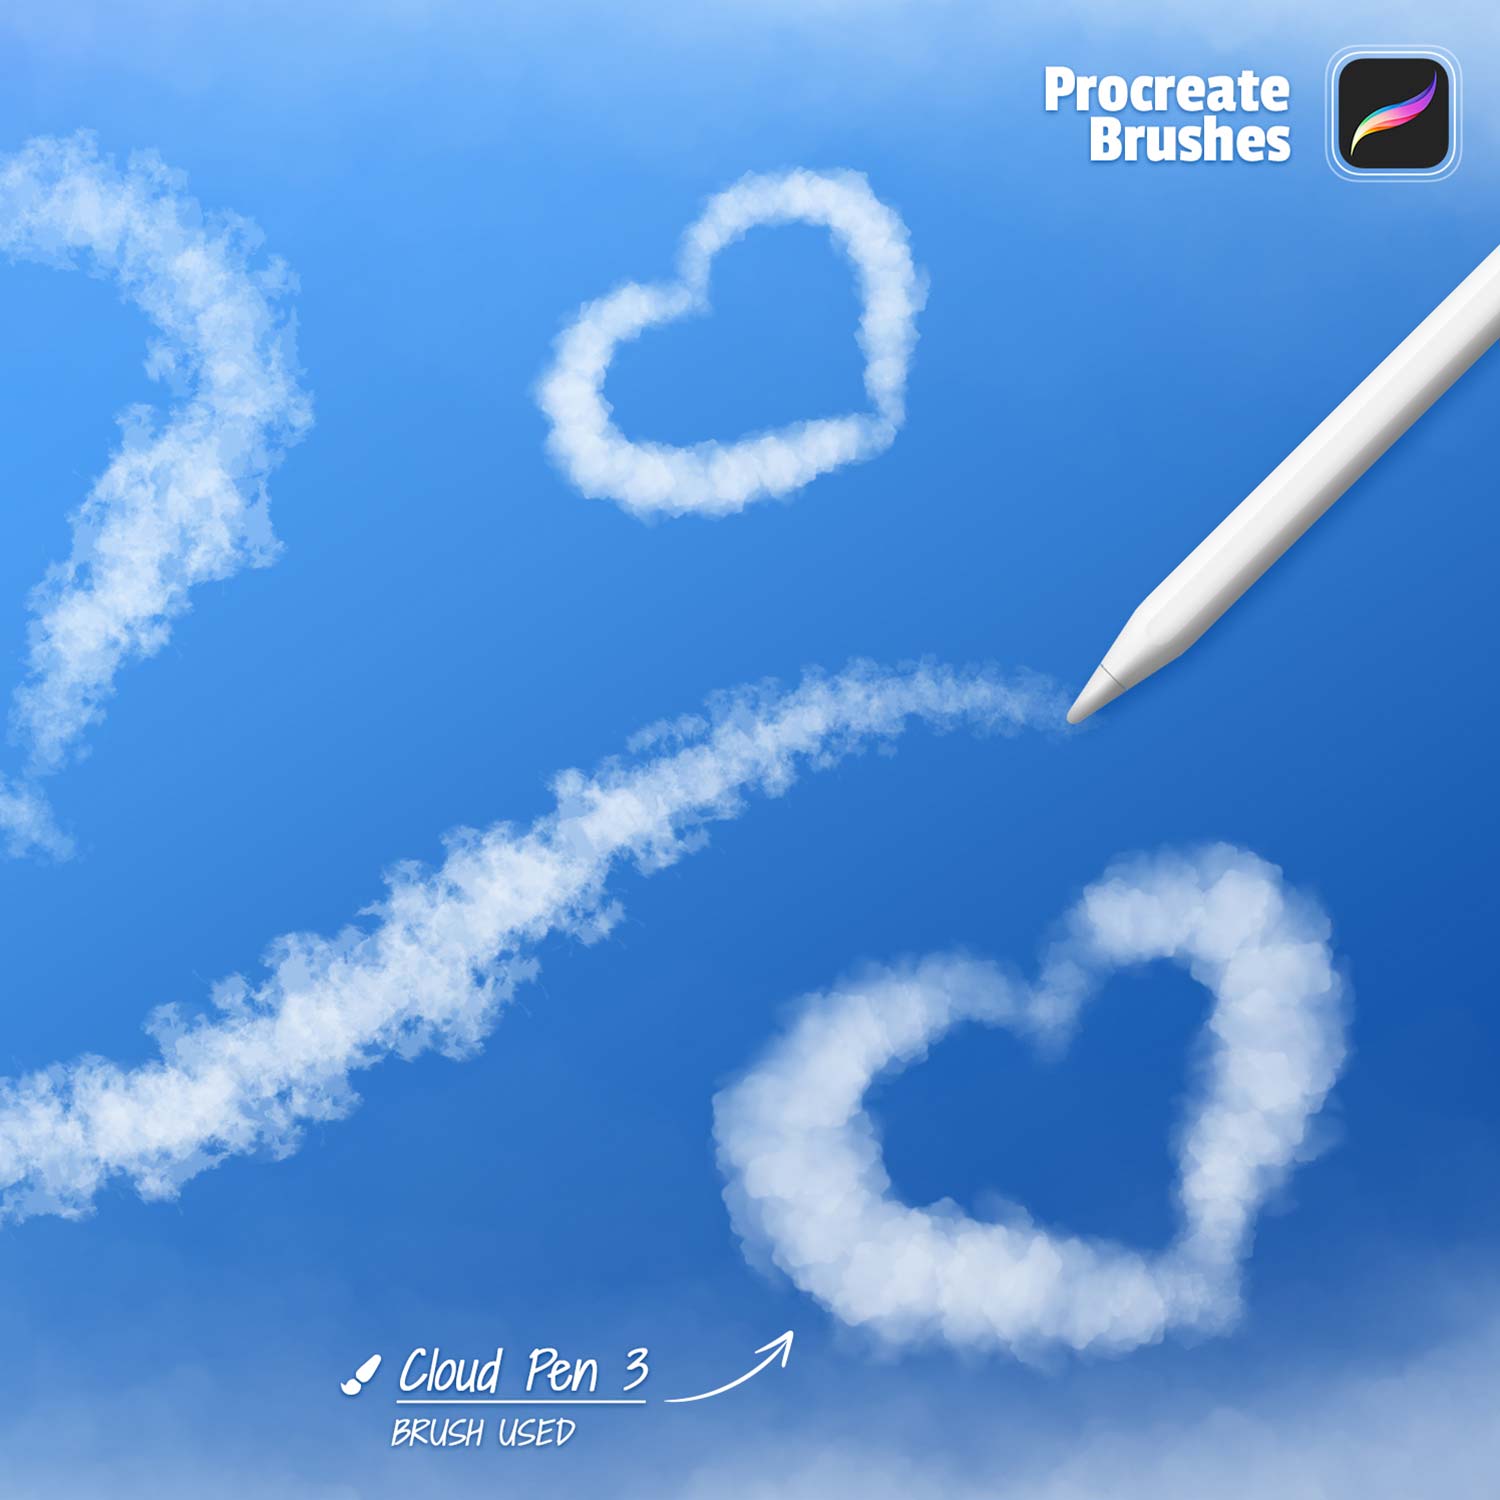 Clouds Procreate Brushes preview image.